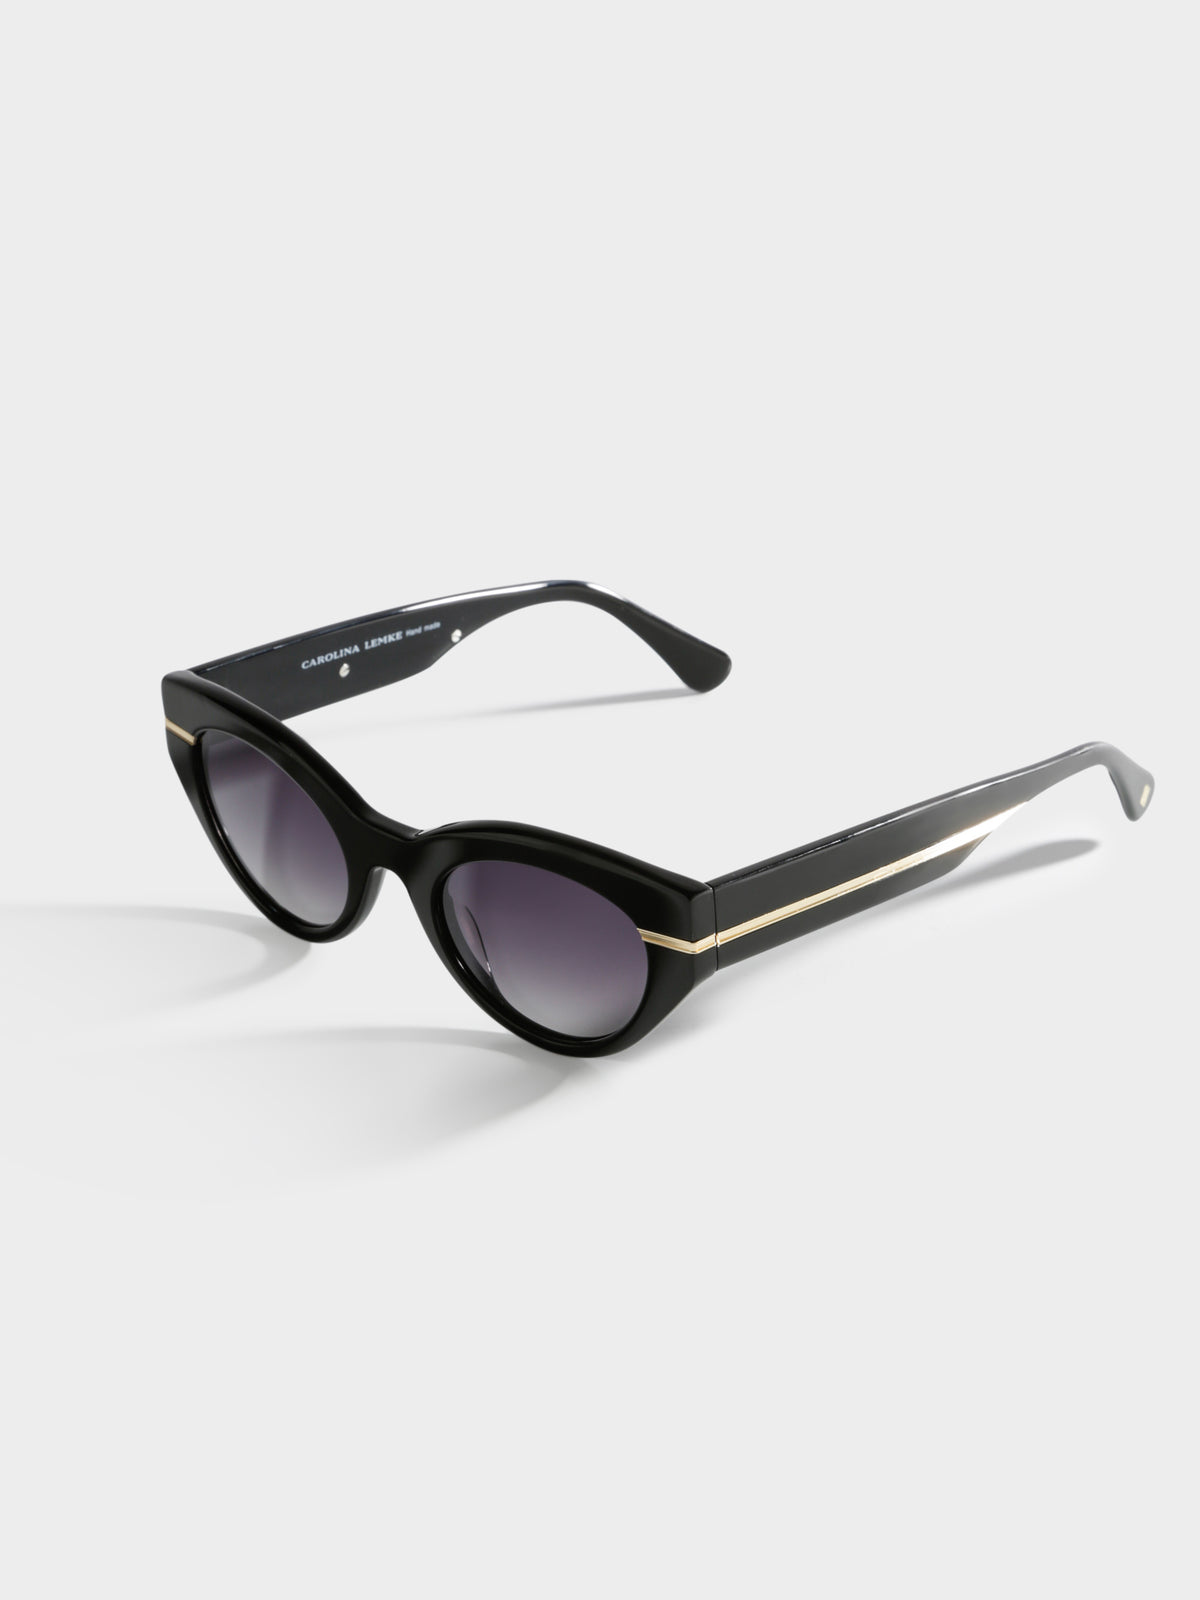 Womens Magnific Cateye Sunglasses in Black with Gradient Smoke Lens